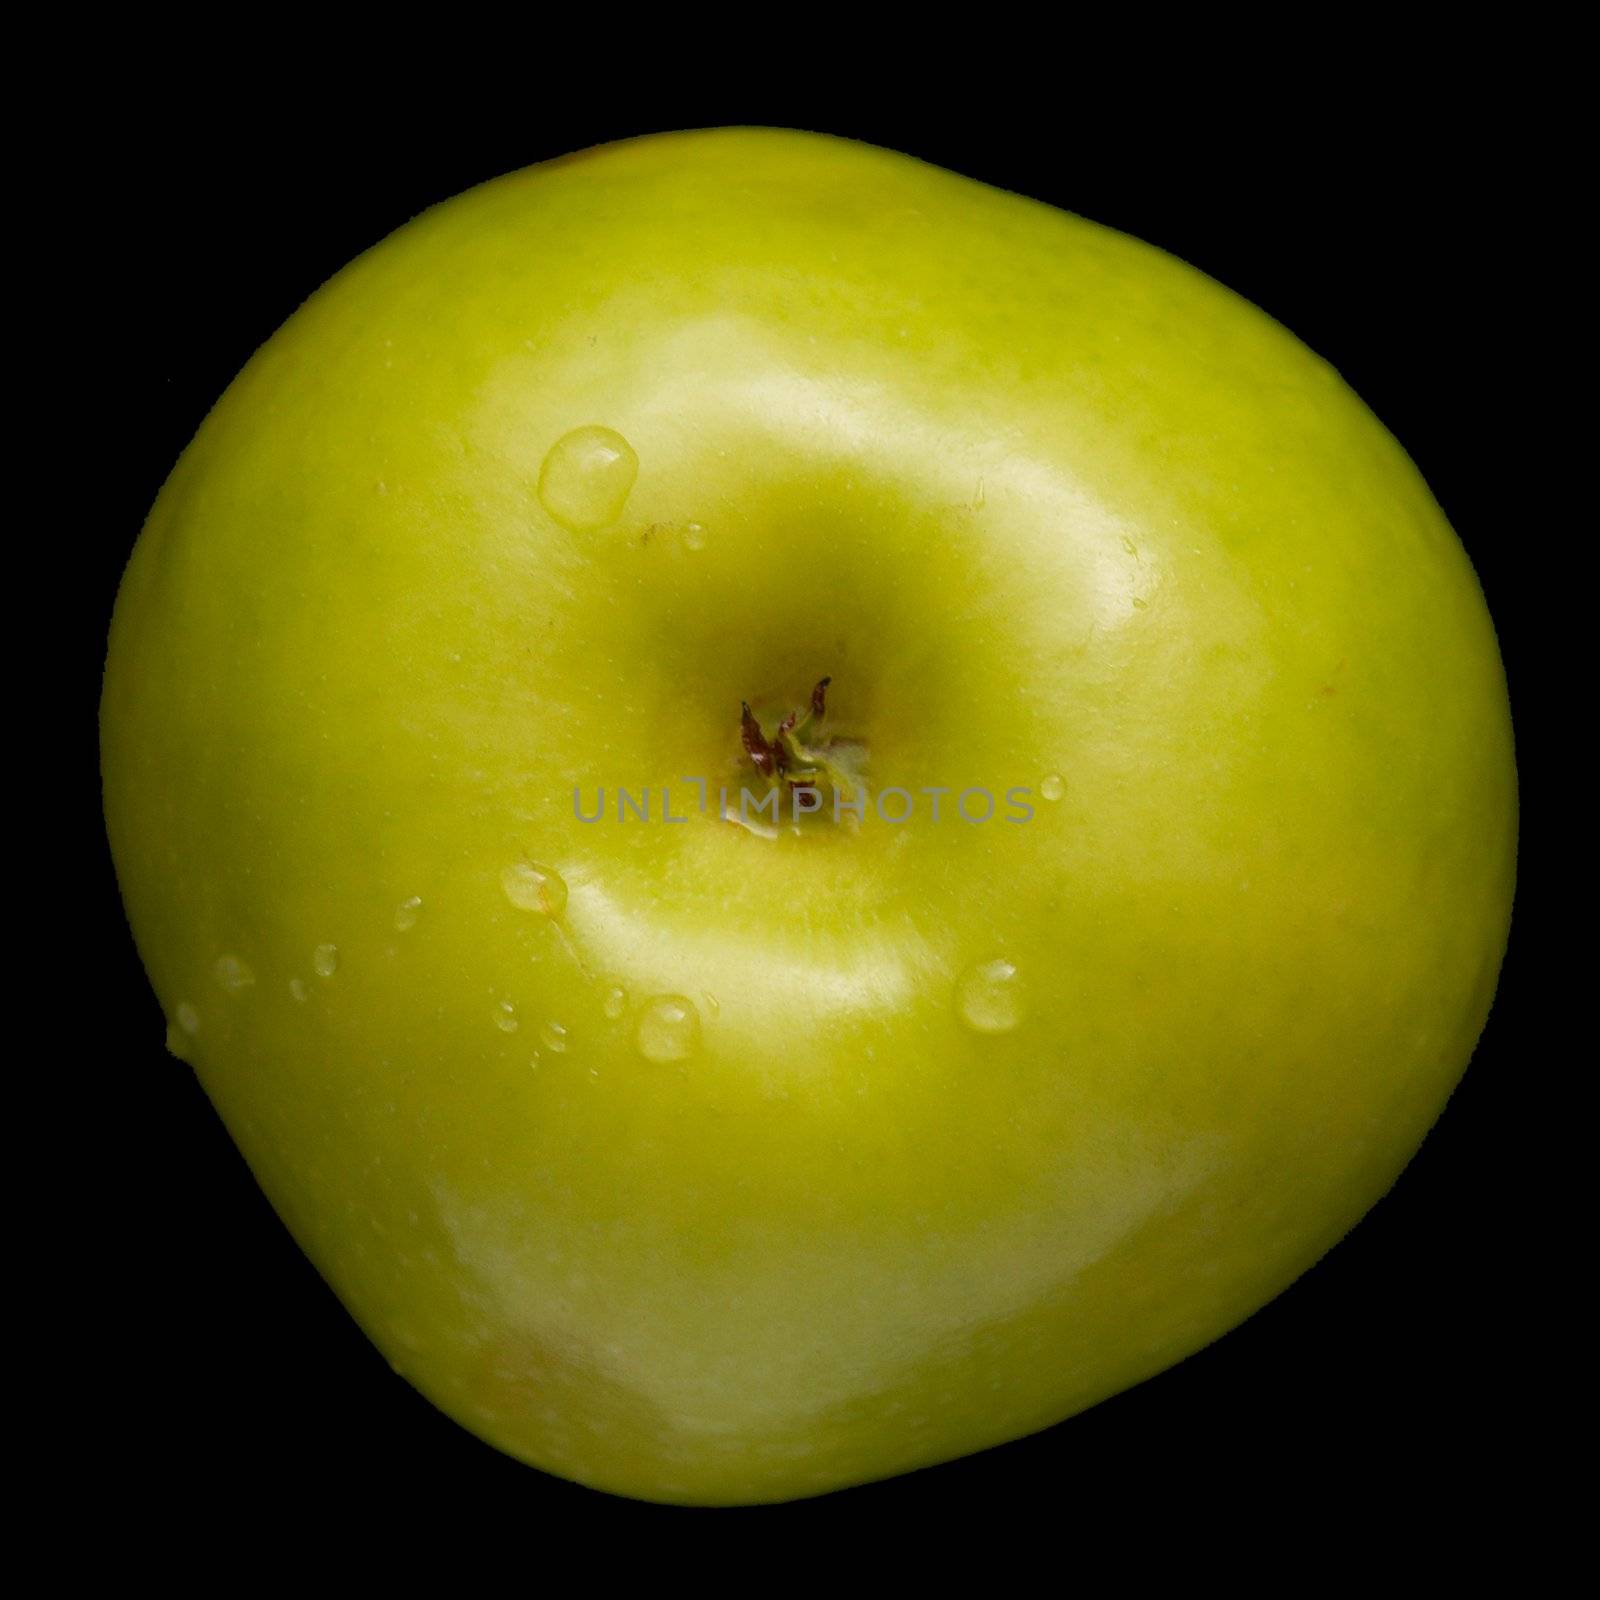 juicy green apple against the black background